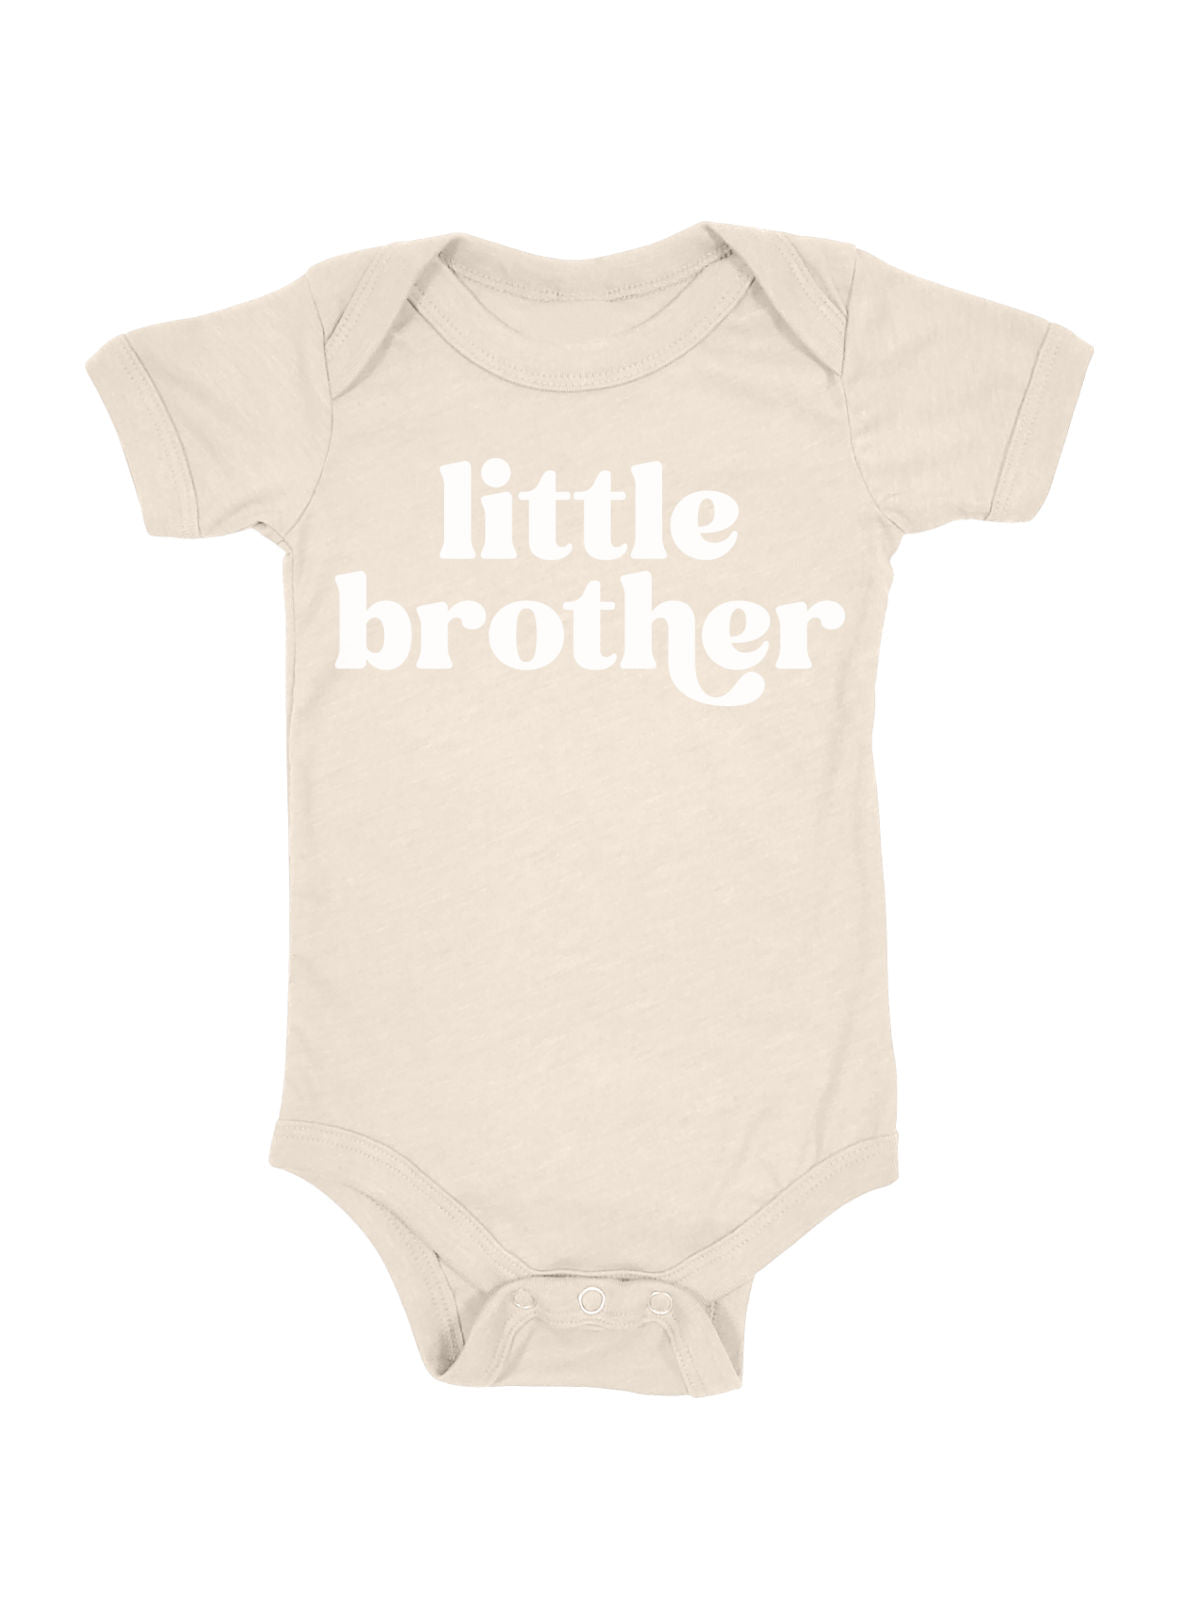 Little Brother Baby Bodysuit in Natural